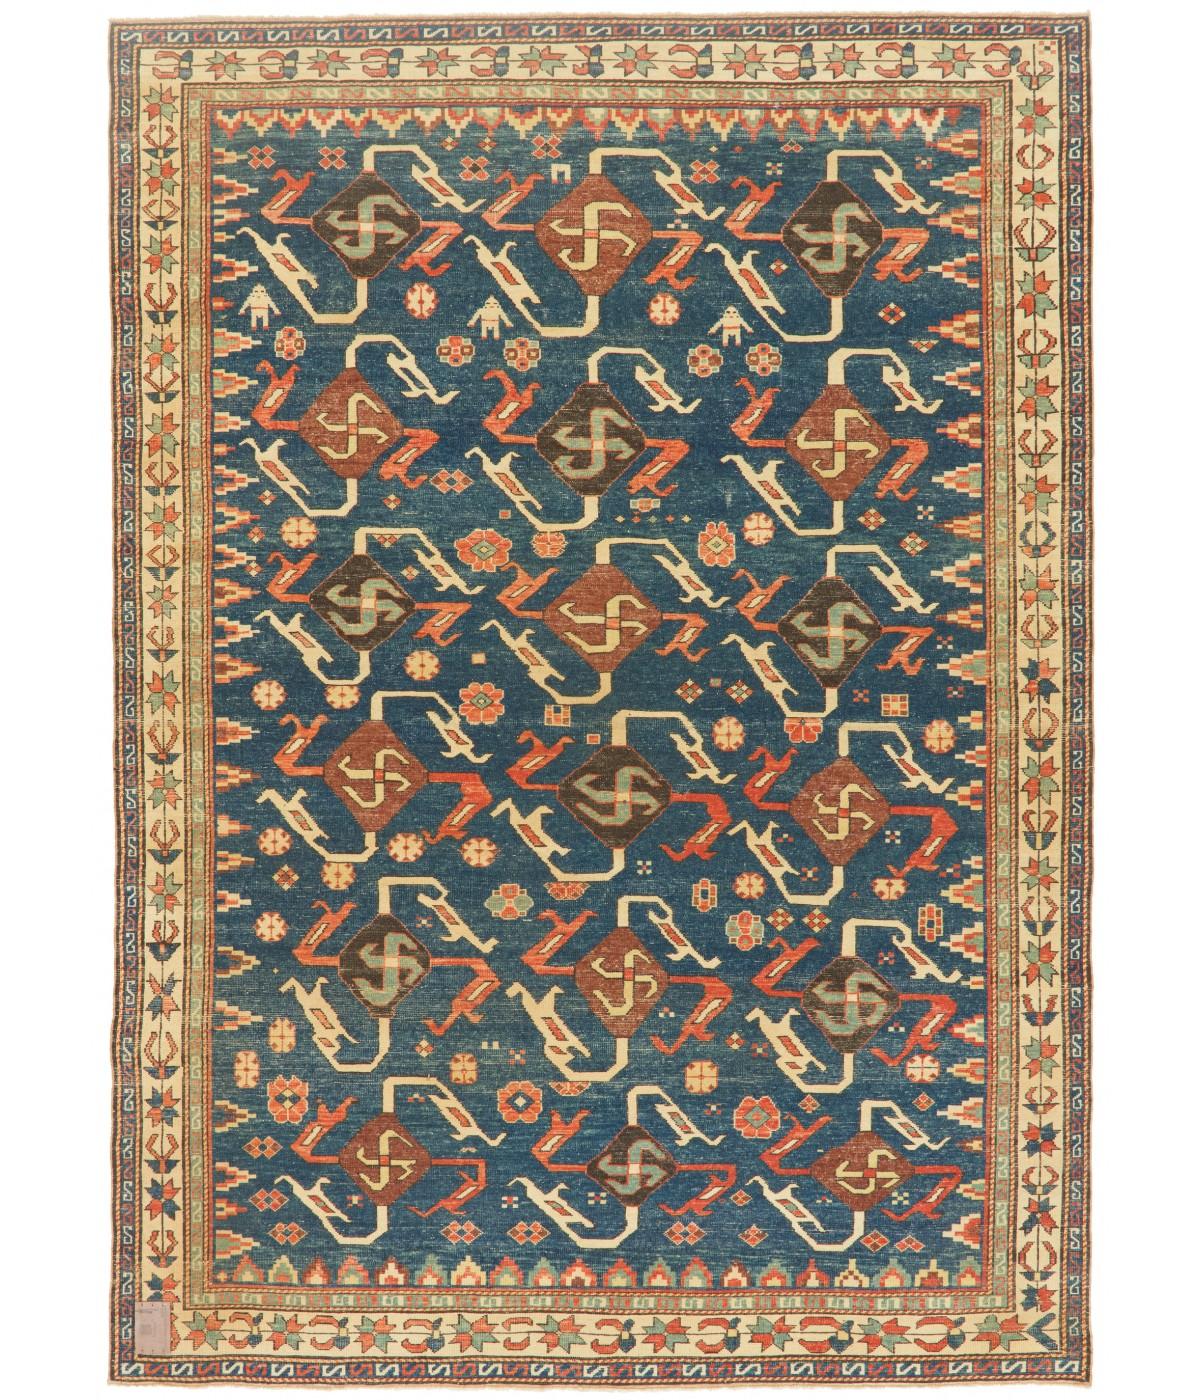 The source of rug comes from the book Orient Star - A Carpet Collection, E. Heinrich Kirchheim, Hali Publications Ltd, 1993 nr.17. This is a remarkable and very unusual swastika designed early 19th-century rug from the Central Caucasia area. This